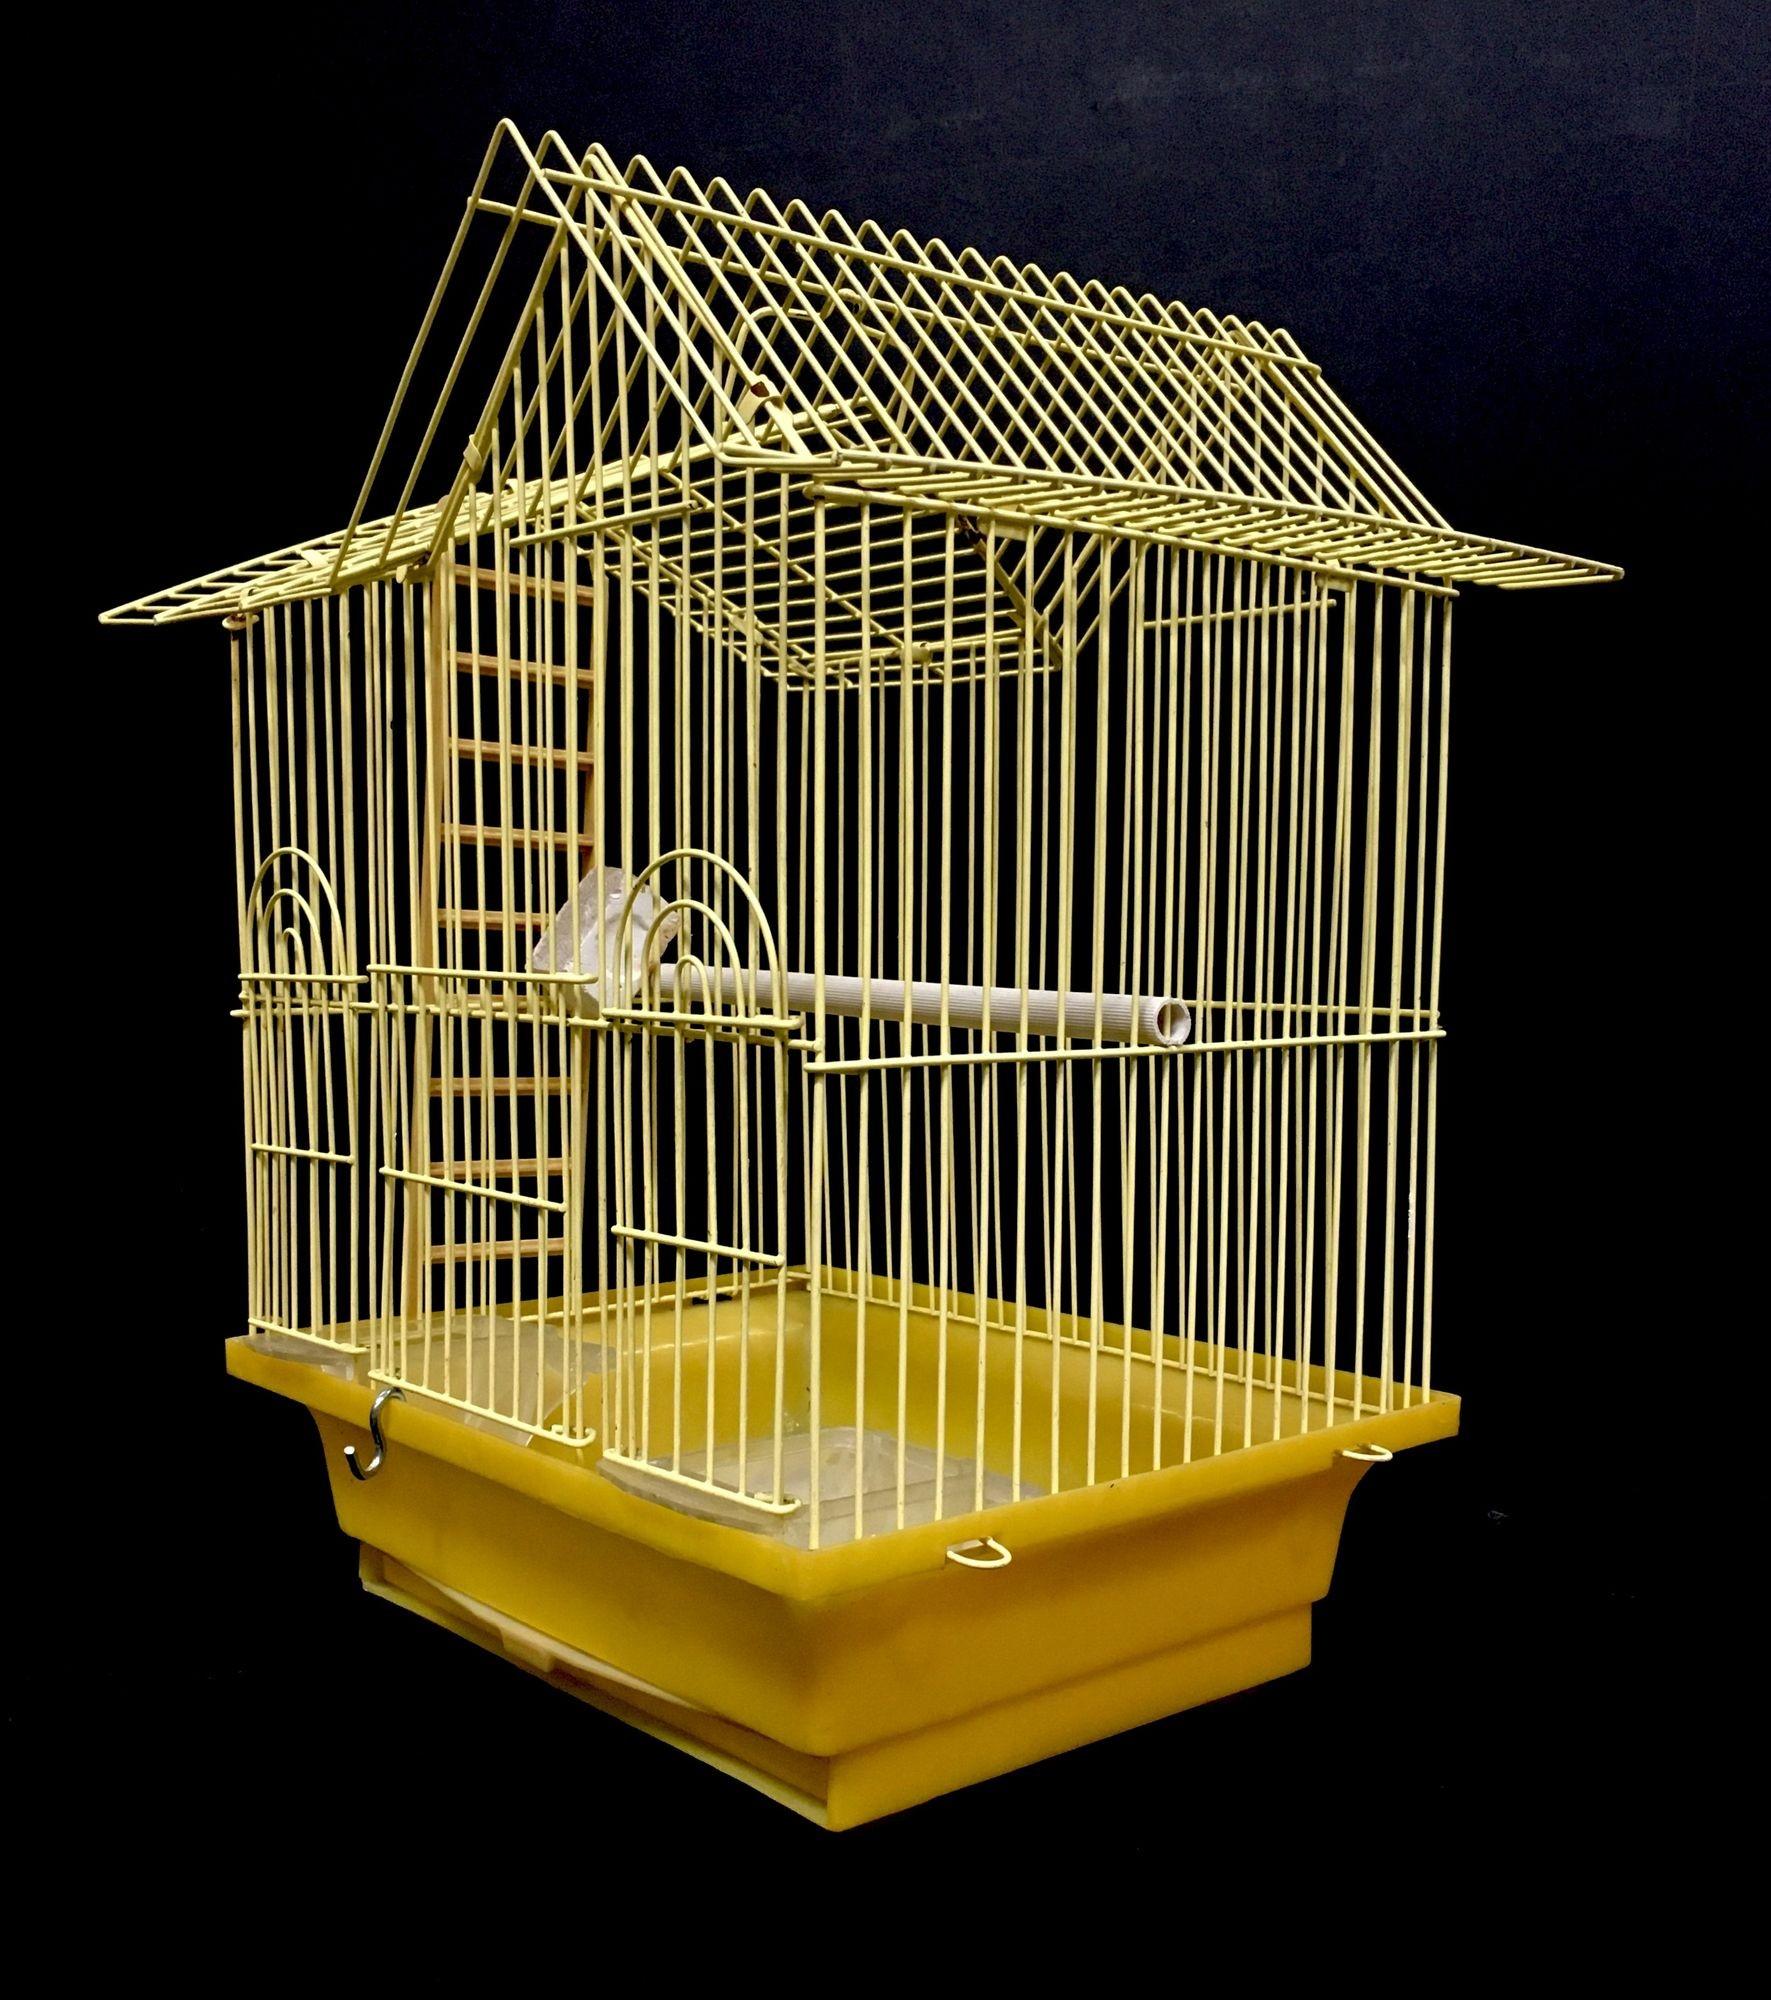 Vintage short wire house birdcage single roof in yellow with accessories. $145
 
This wire birdcage comes with a plastic perch, one ladder, and 2 removable feeder trays, removable grille and pullout debris tray which makes it for an easy cleaning